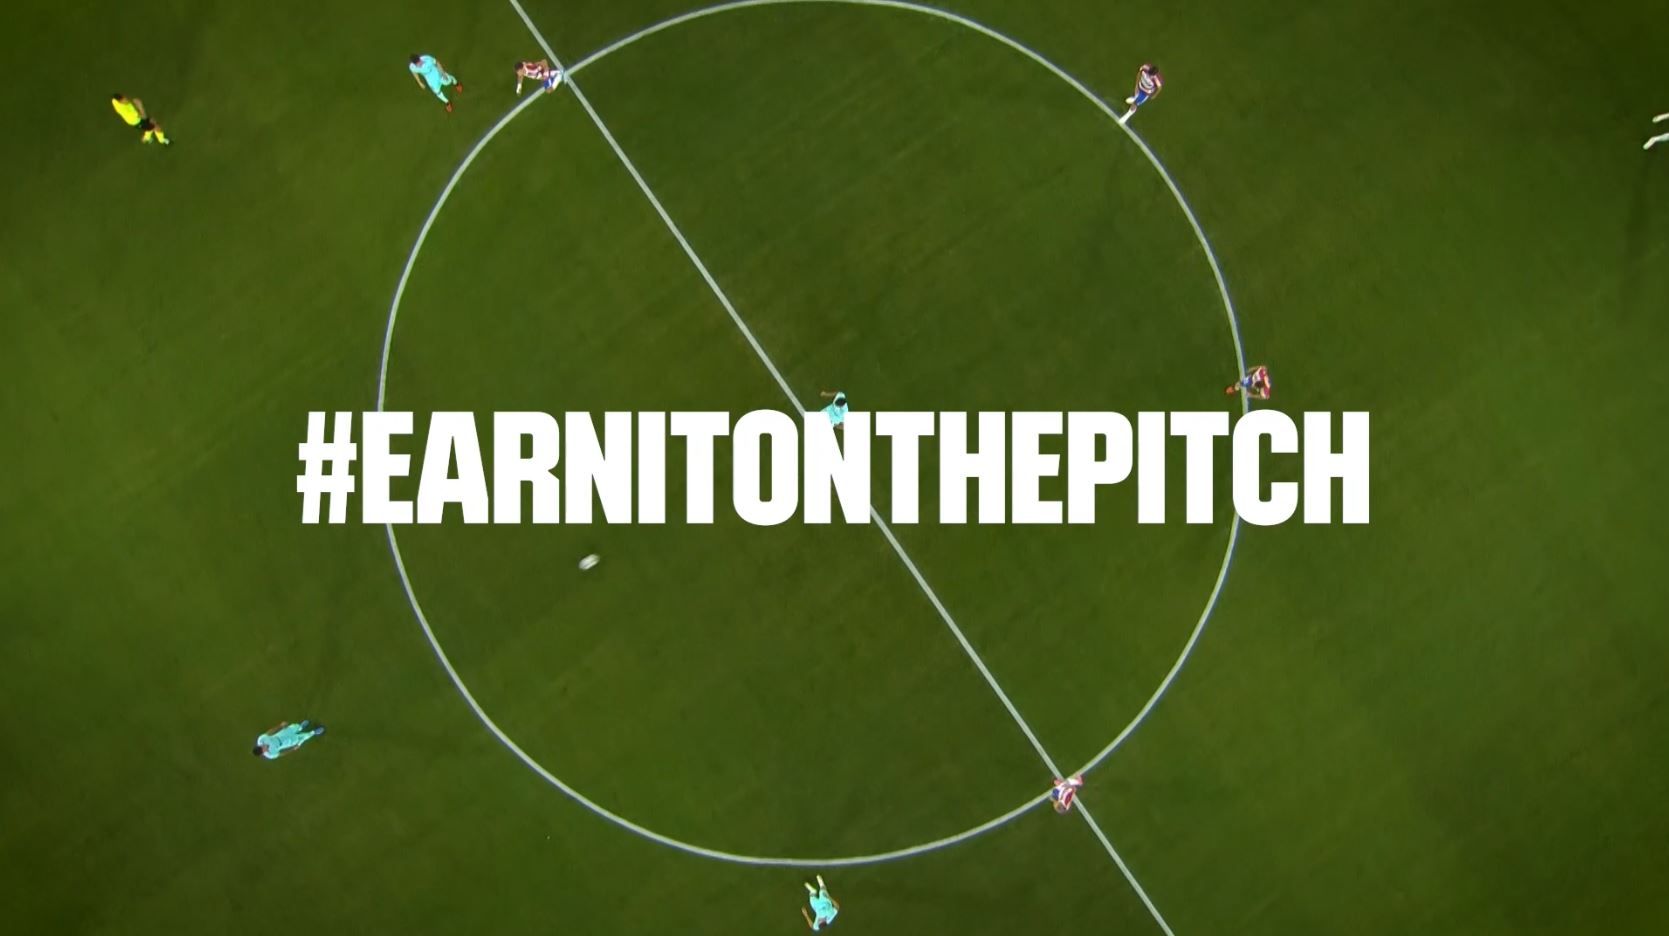 Earn_It_On_The_Pitch_a4c01f16a4